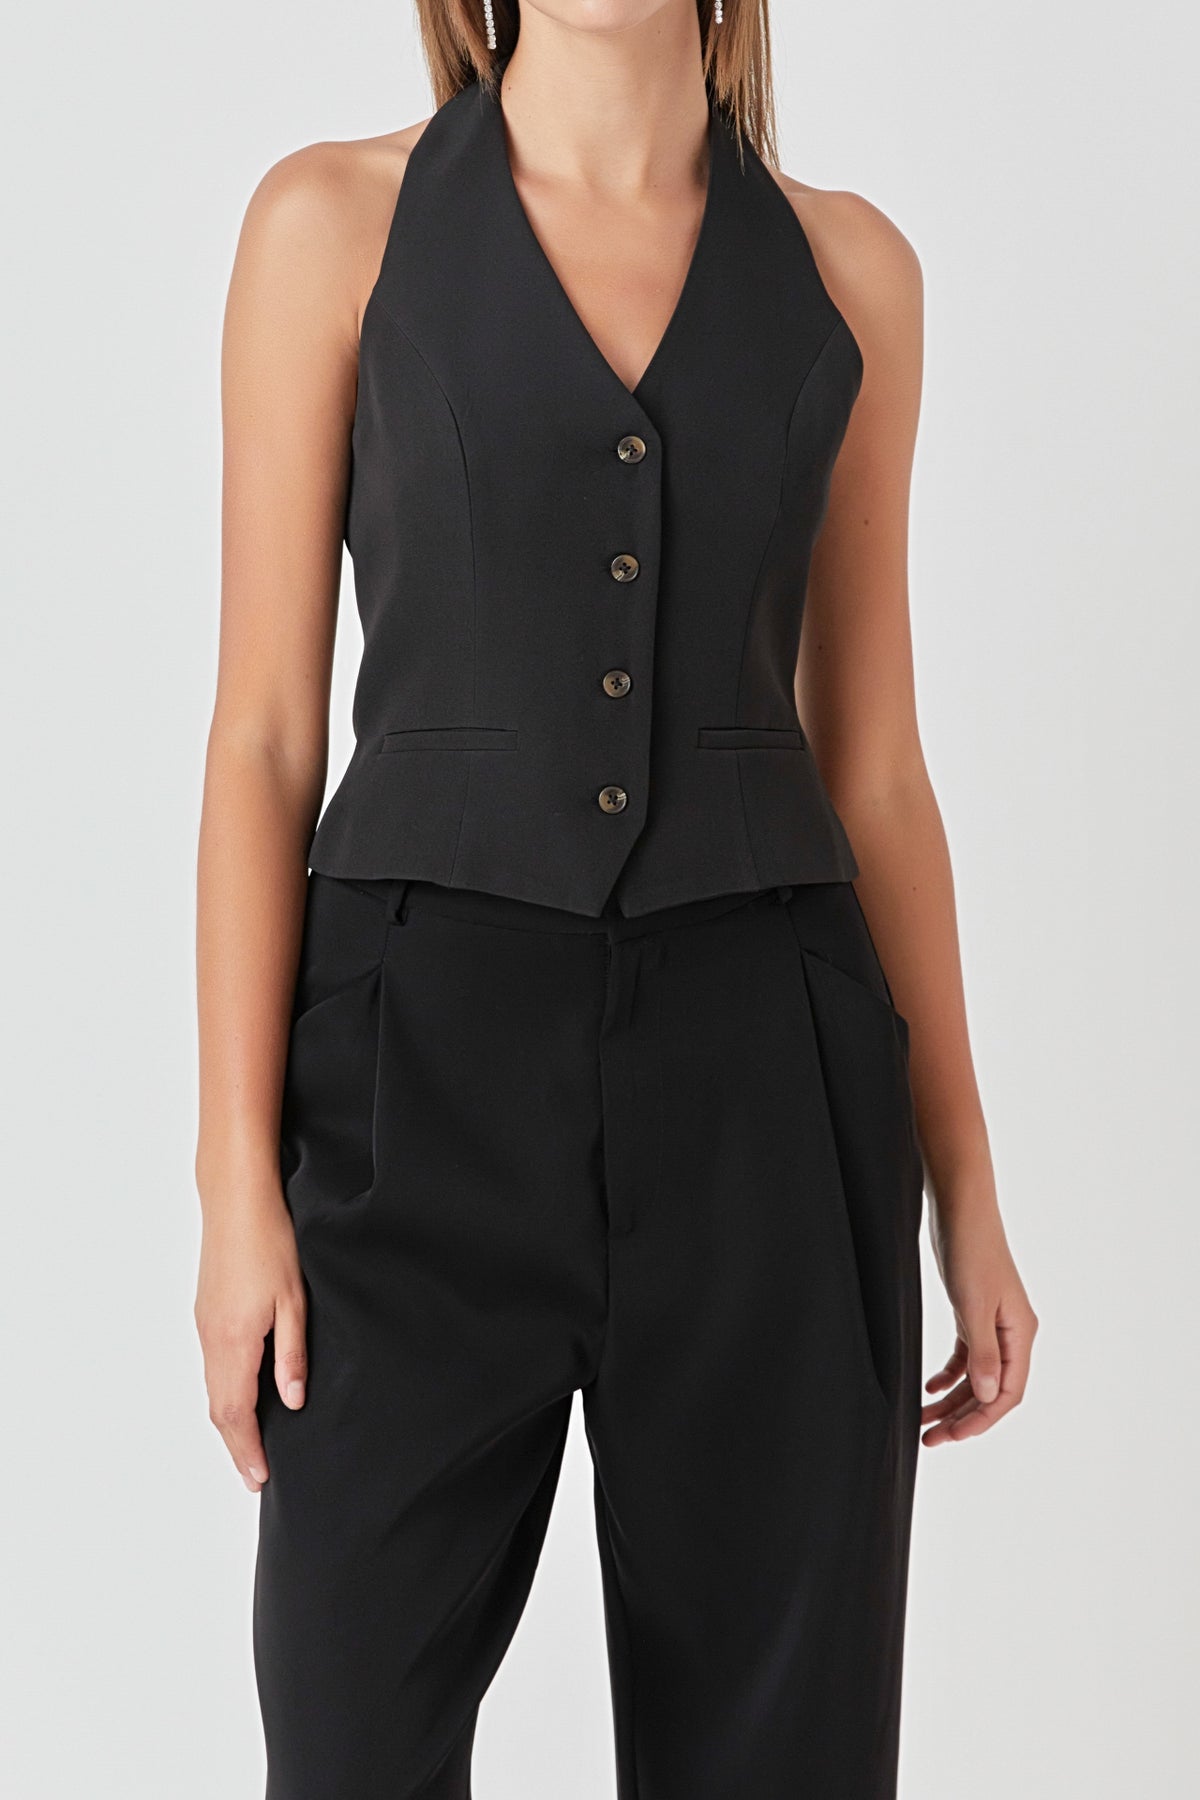 ENDLESS ROSE - Halter Tailored Vest - TOPS available at Objectrare